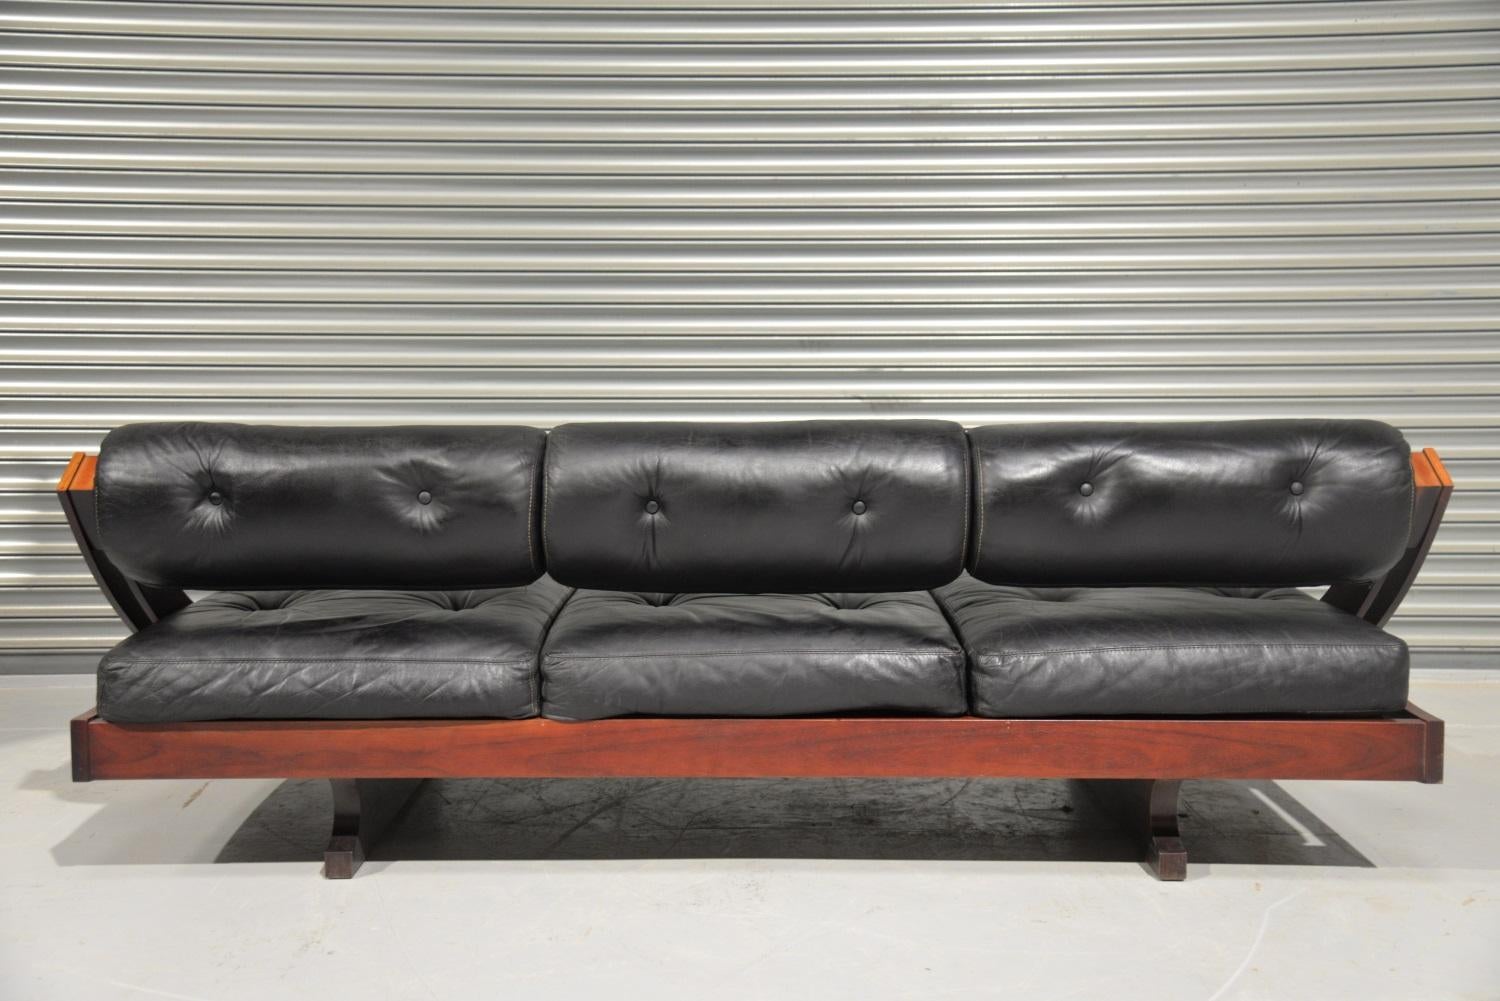 Gianni Songia GS195 Leather Daybed and Sofa for Sormani, Italy, 1963 (Mitte des 20. Jahrhunderts) im Angebot